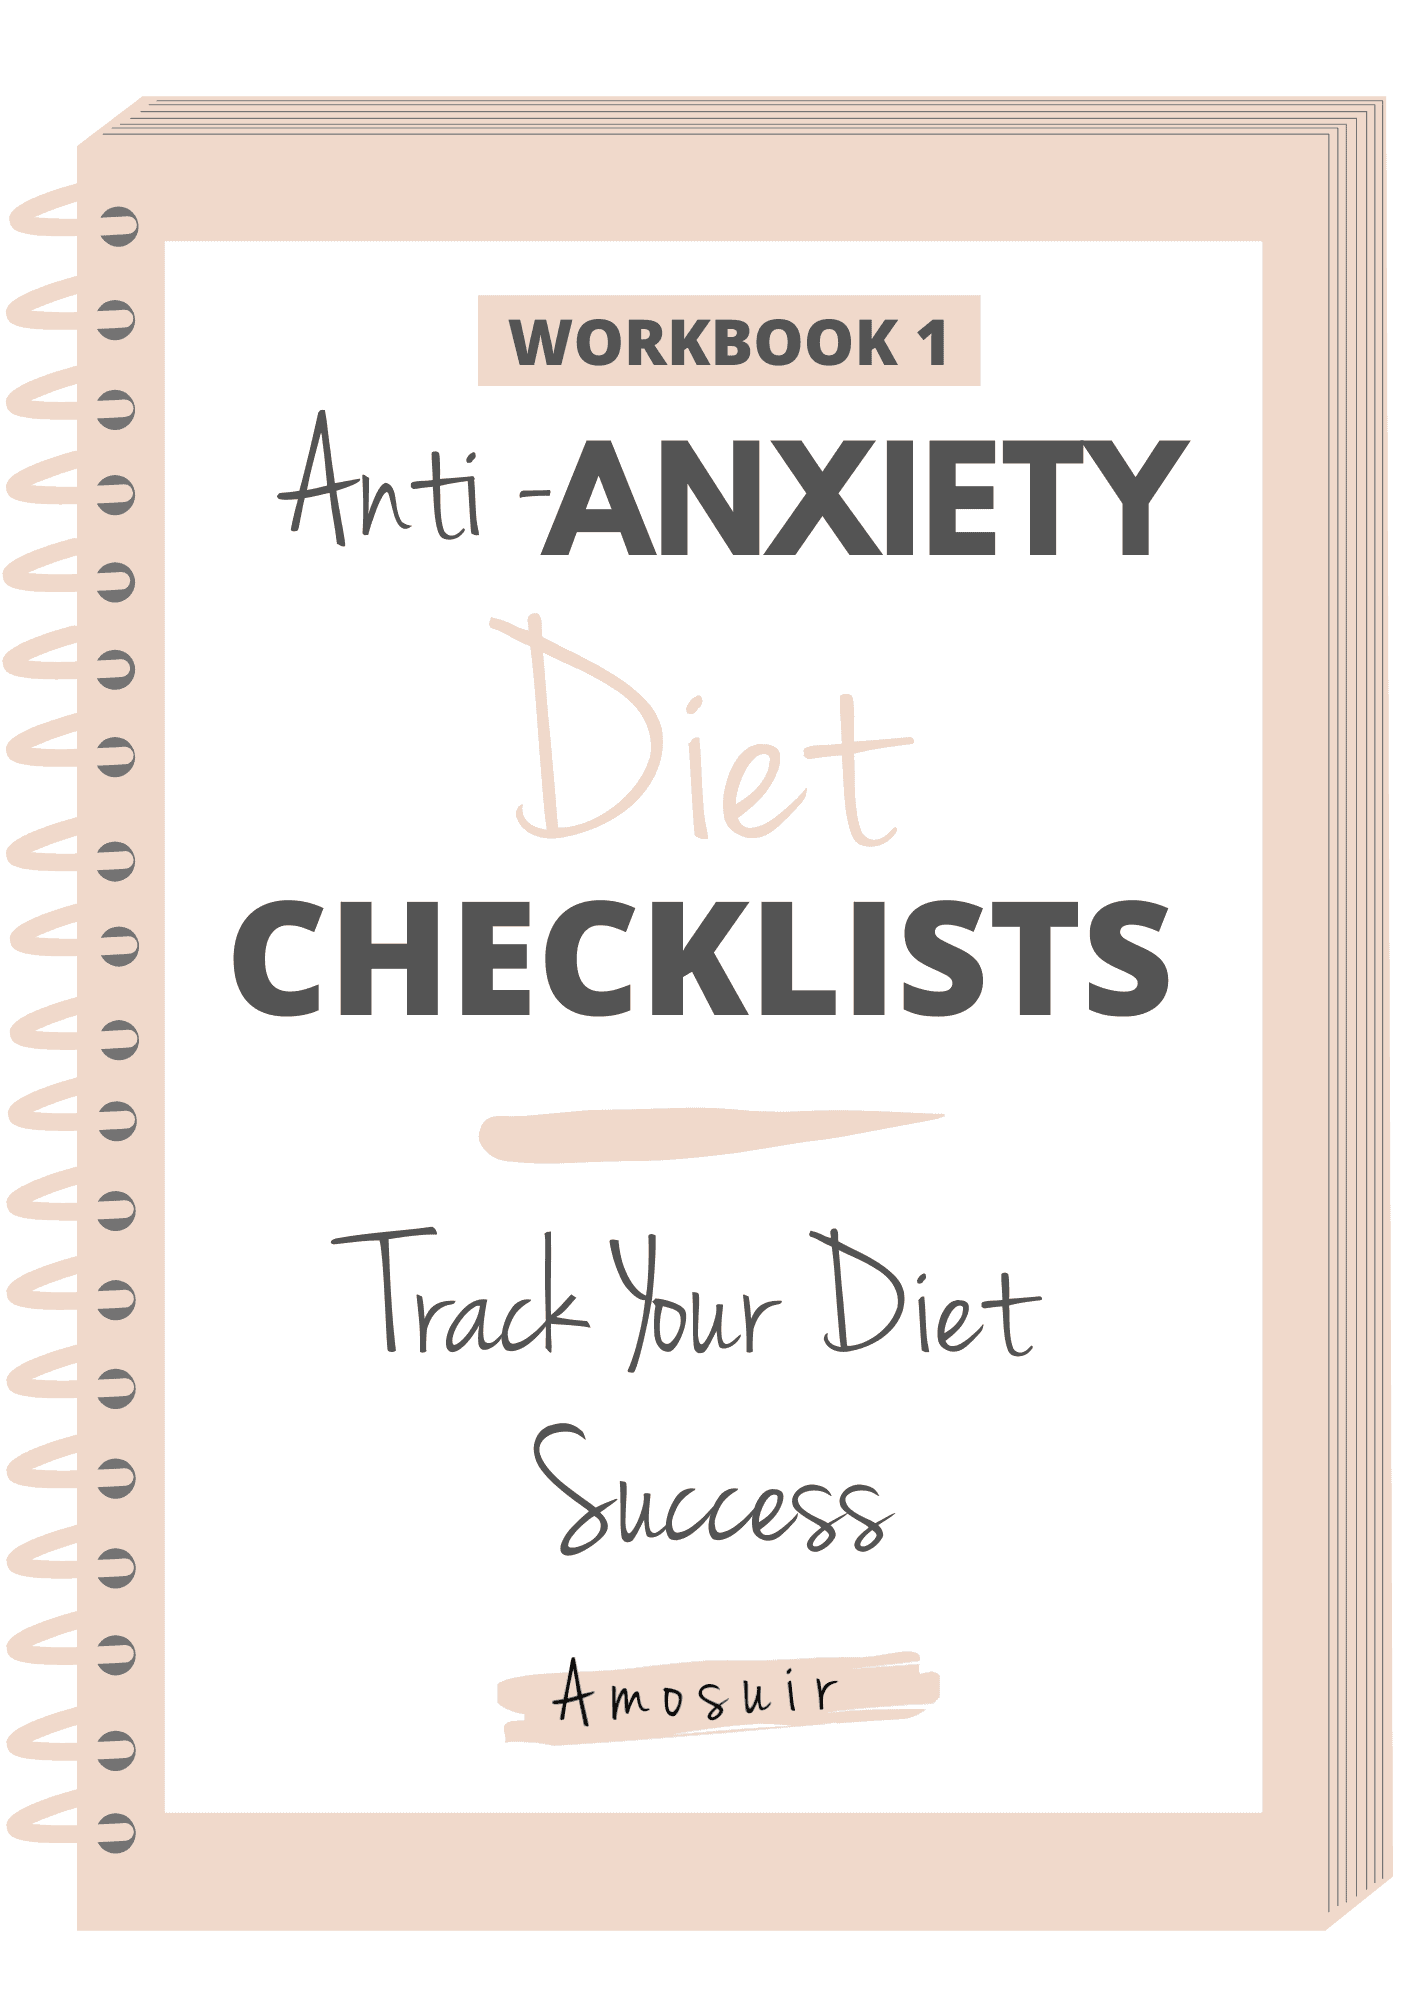 Anti-anxiety diet checklists workbook front cover